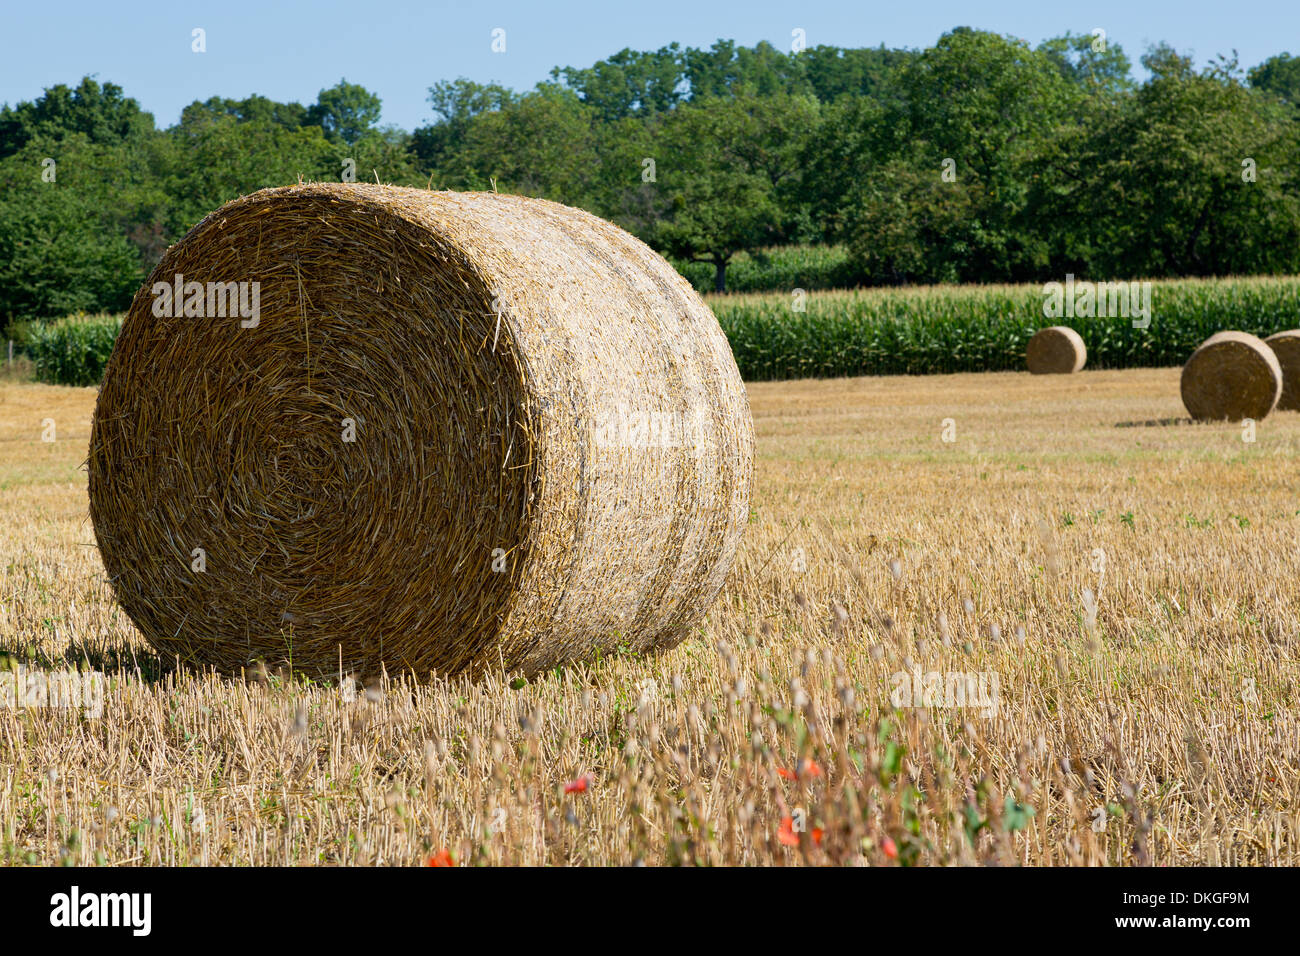 Bales of straw on a field, Bas-Rhin, Alsace, France, Europe Stock Photo